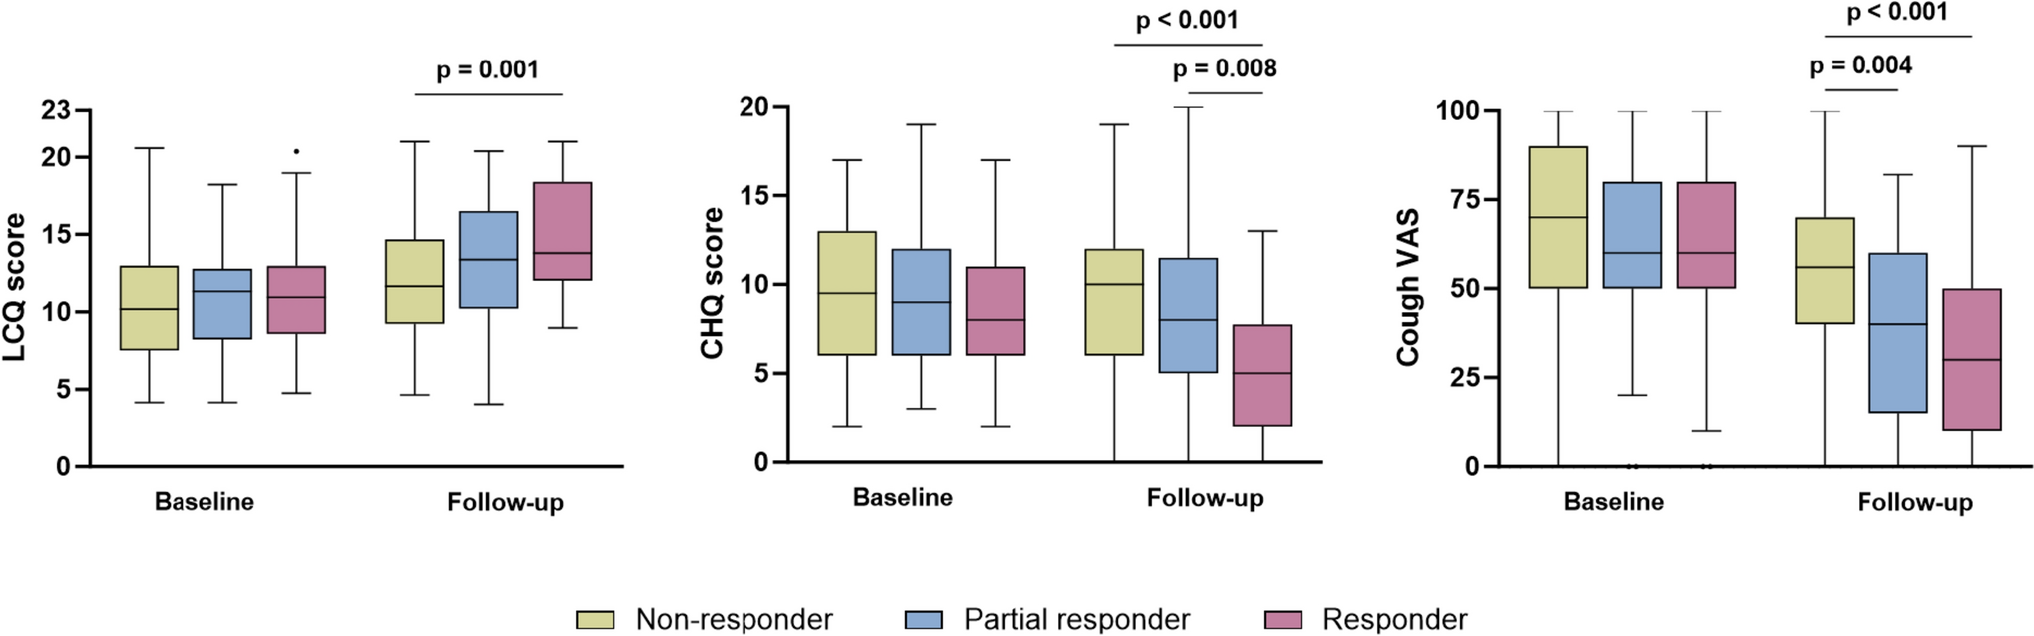 Characterization of Codeine Treatment Responders Among Patients with Refractory or Unexplained Chronic Cough: A Prospective Real-World Cohort Study